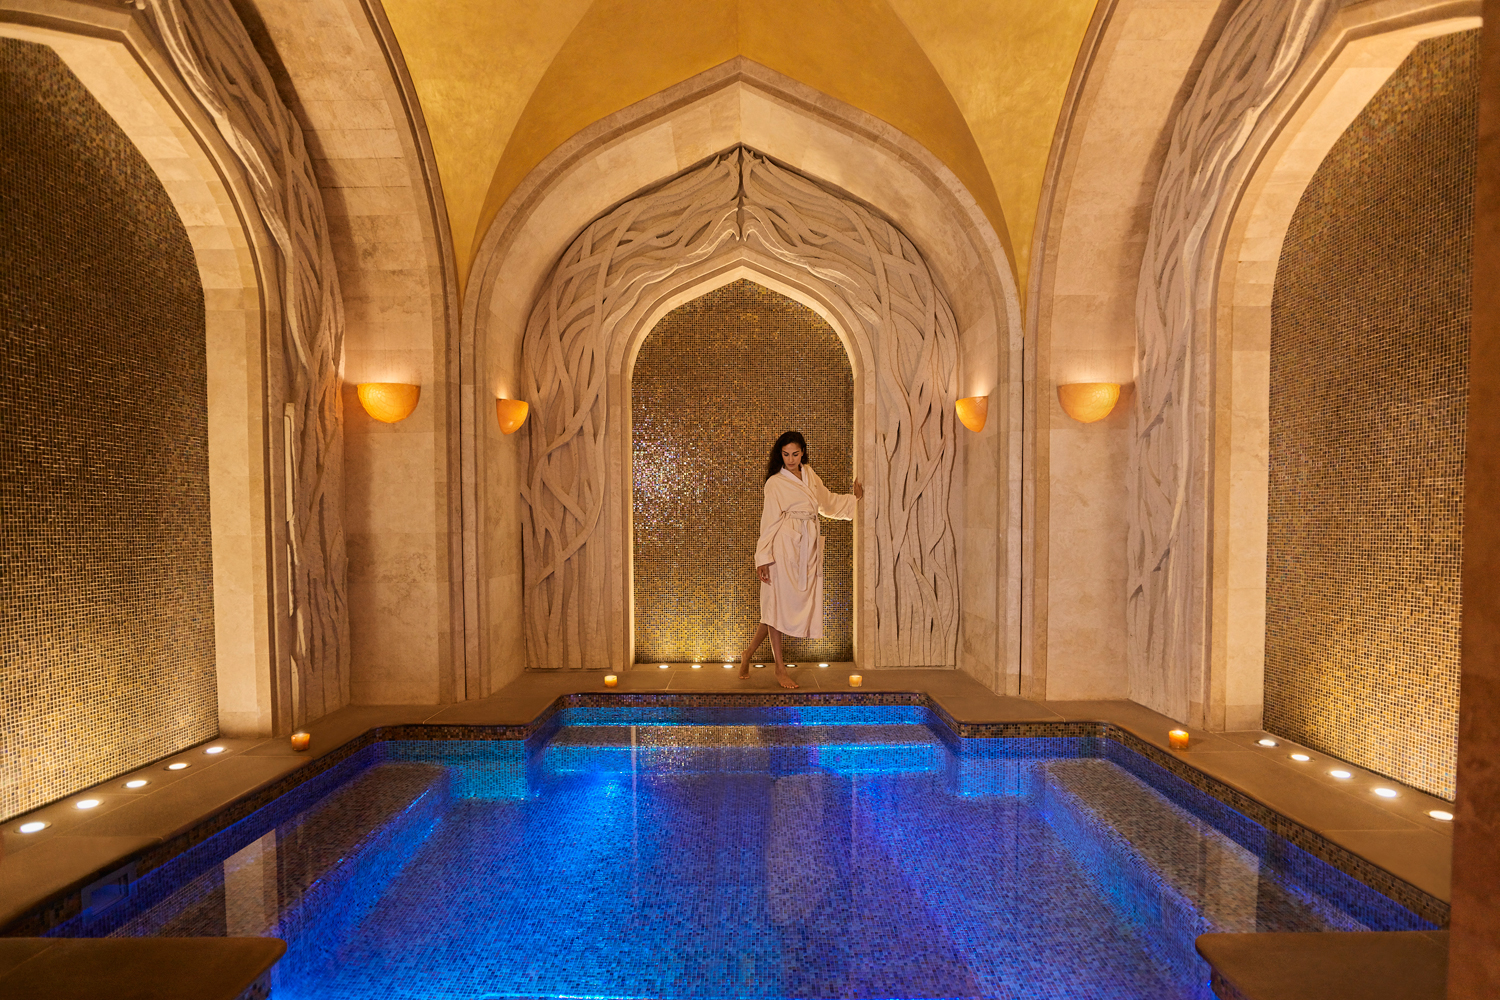 Shuiqi Spa At Atlantis Launches Special Summer ‘pamper Me Wellbeing Time Out Dubai